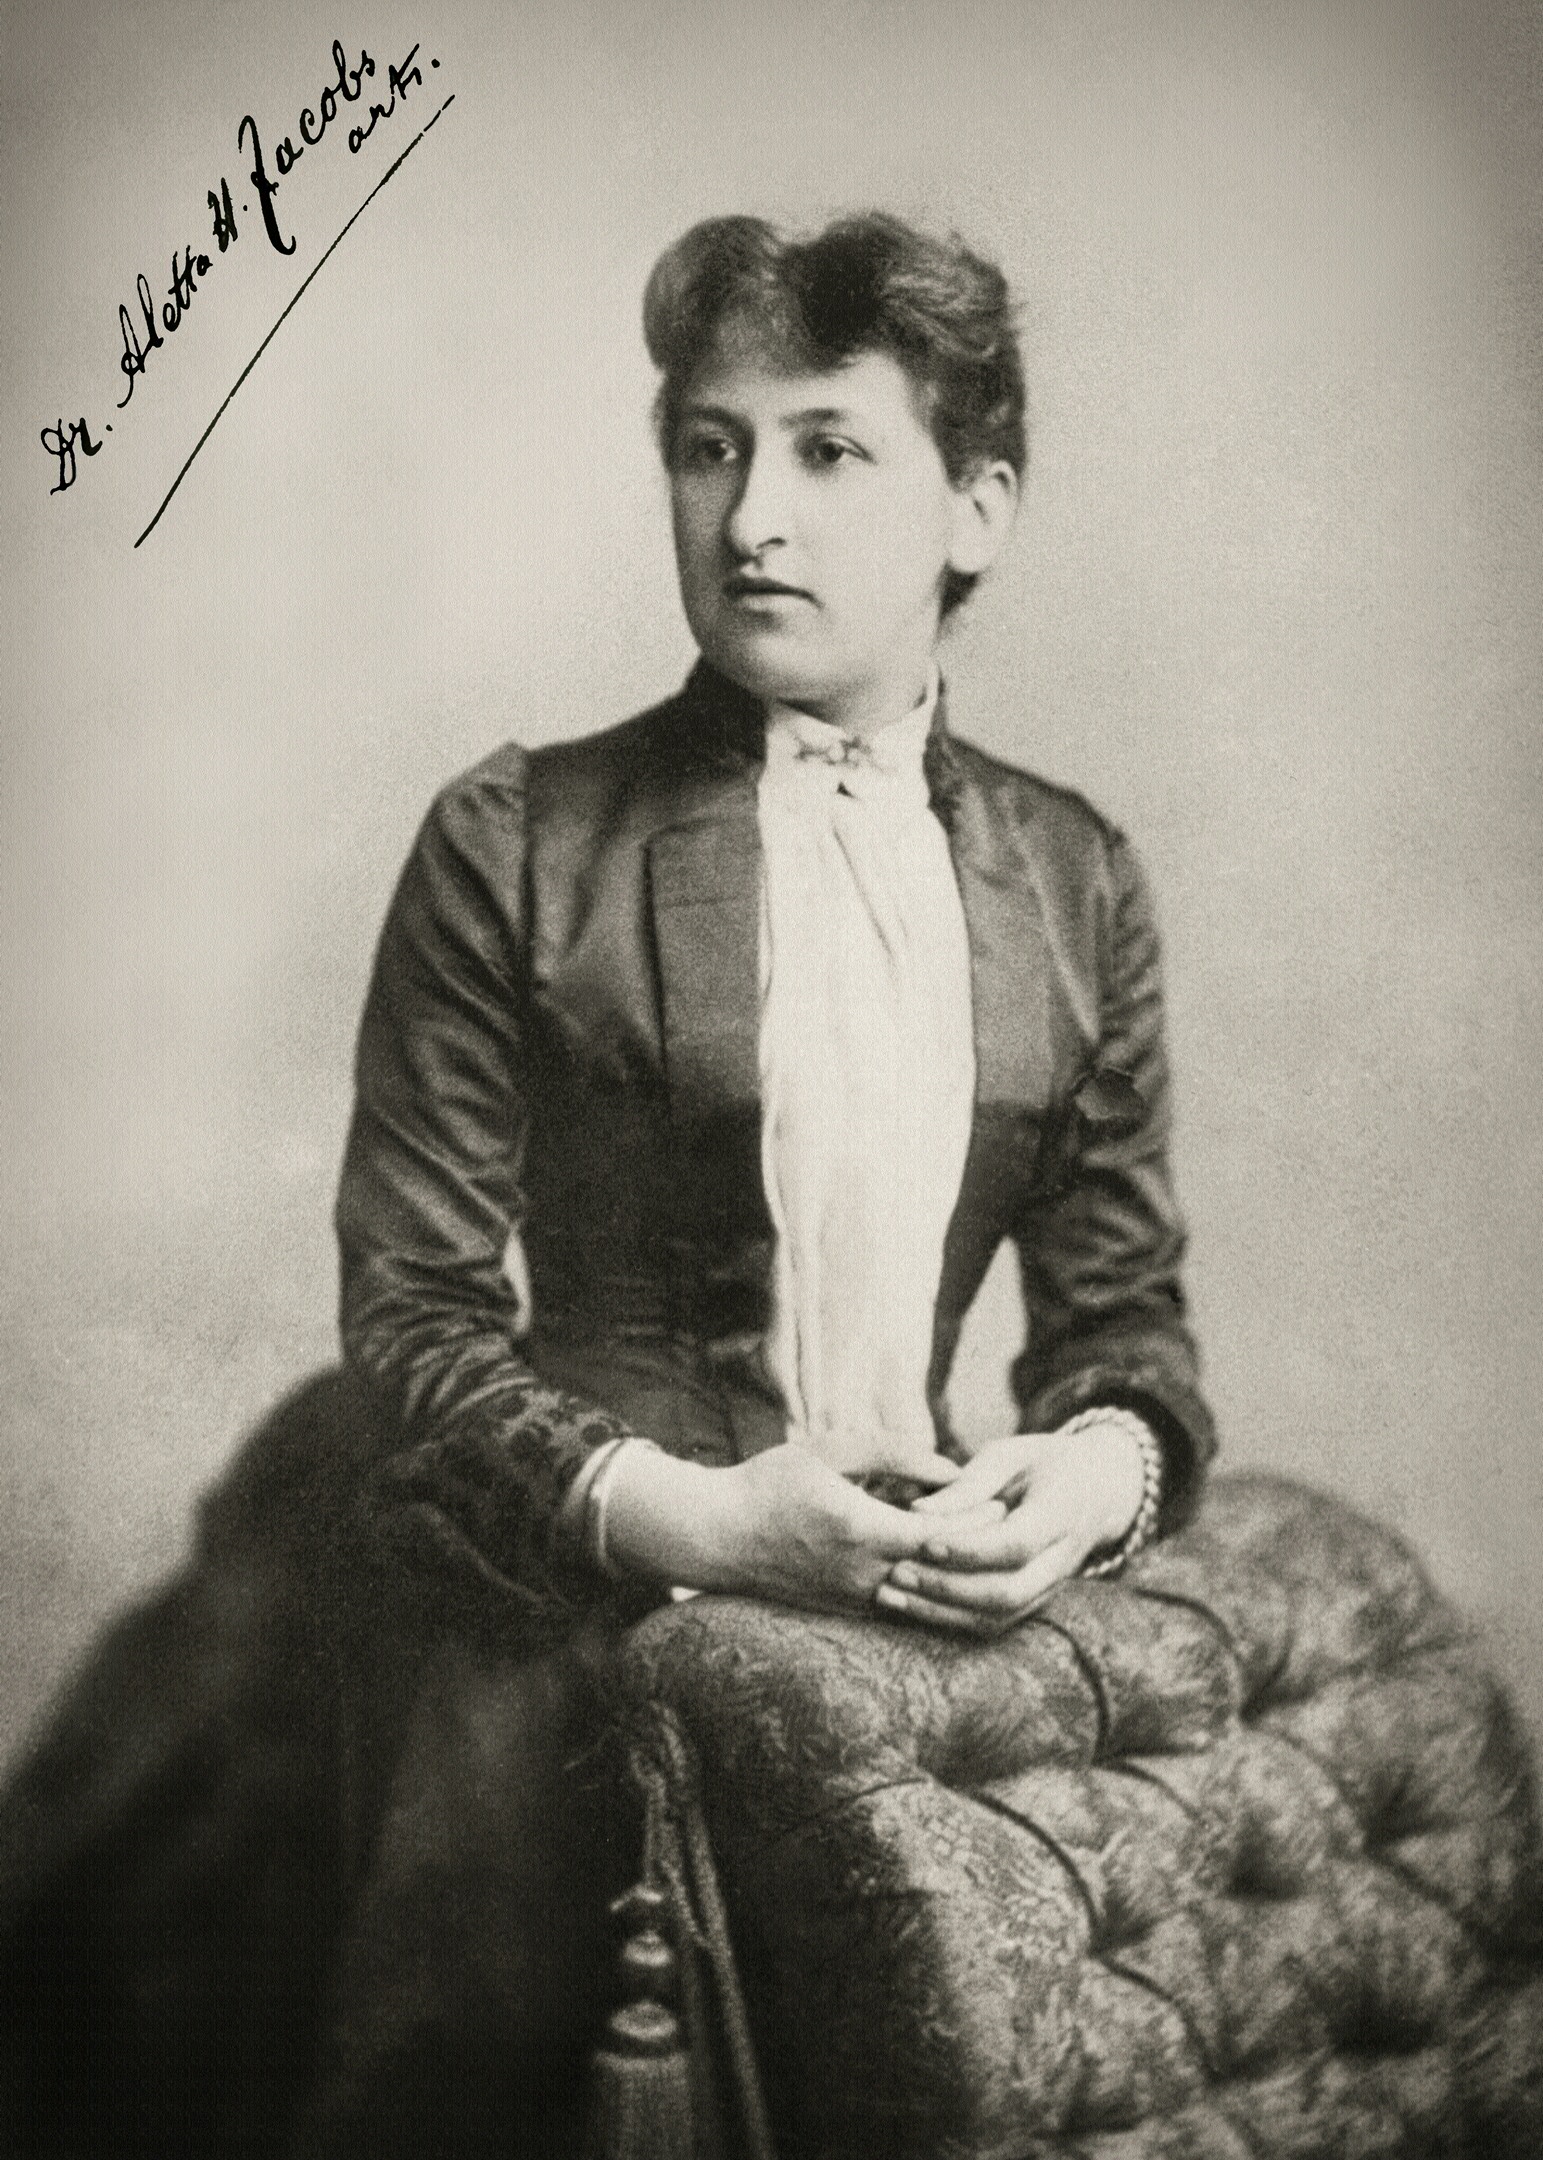 Photo taken on the day of her promotion, 8 March1879. Source: Aletta Jacobs room, University Museum